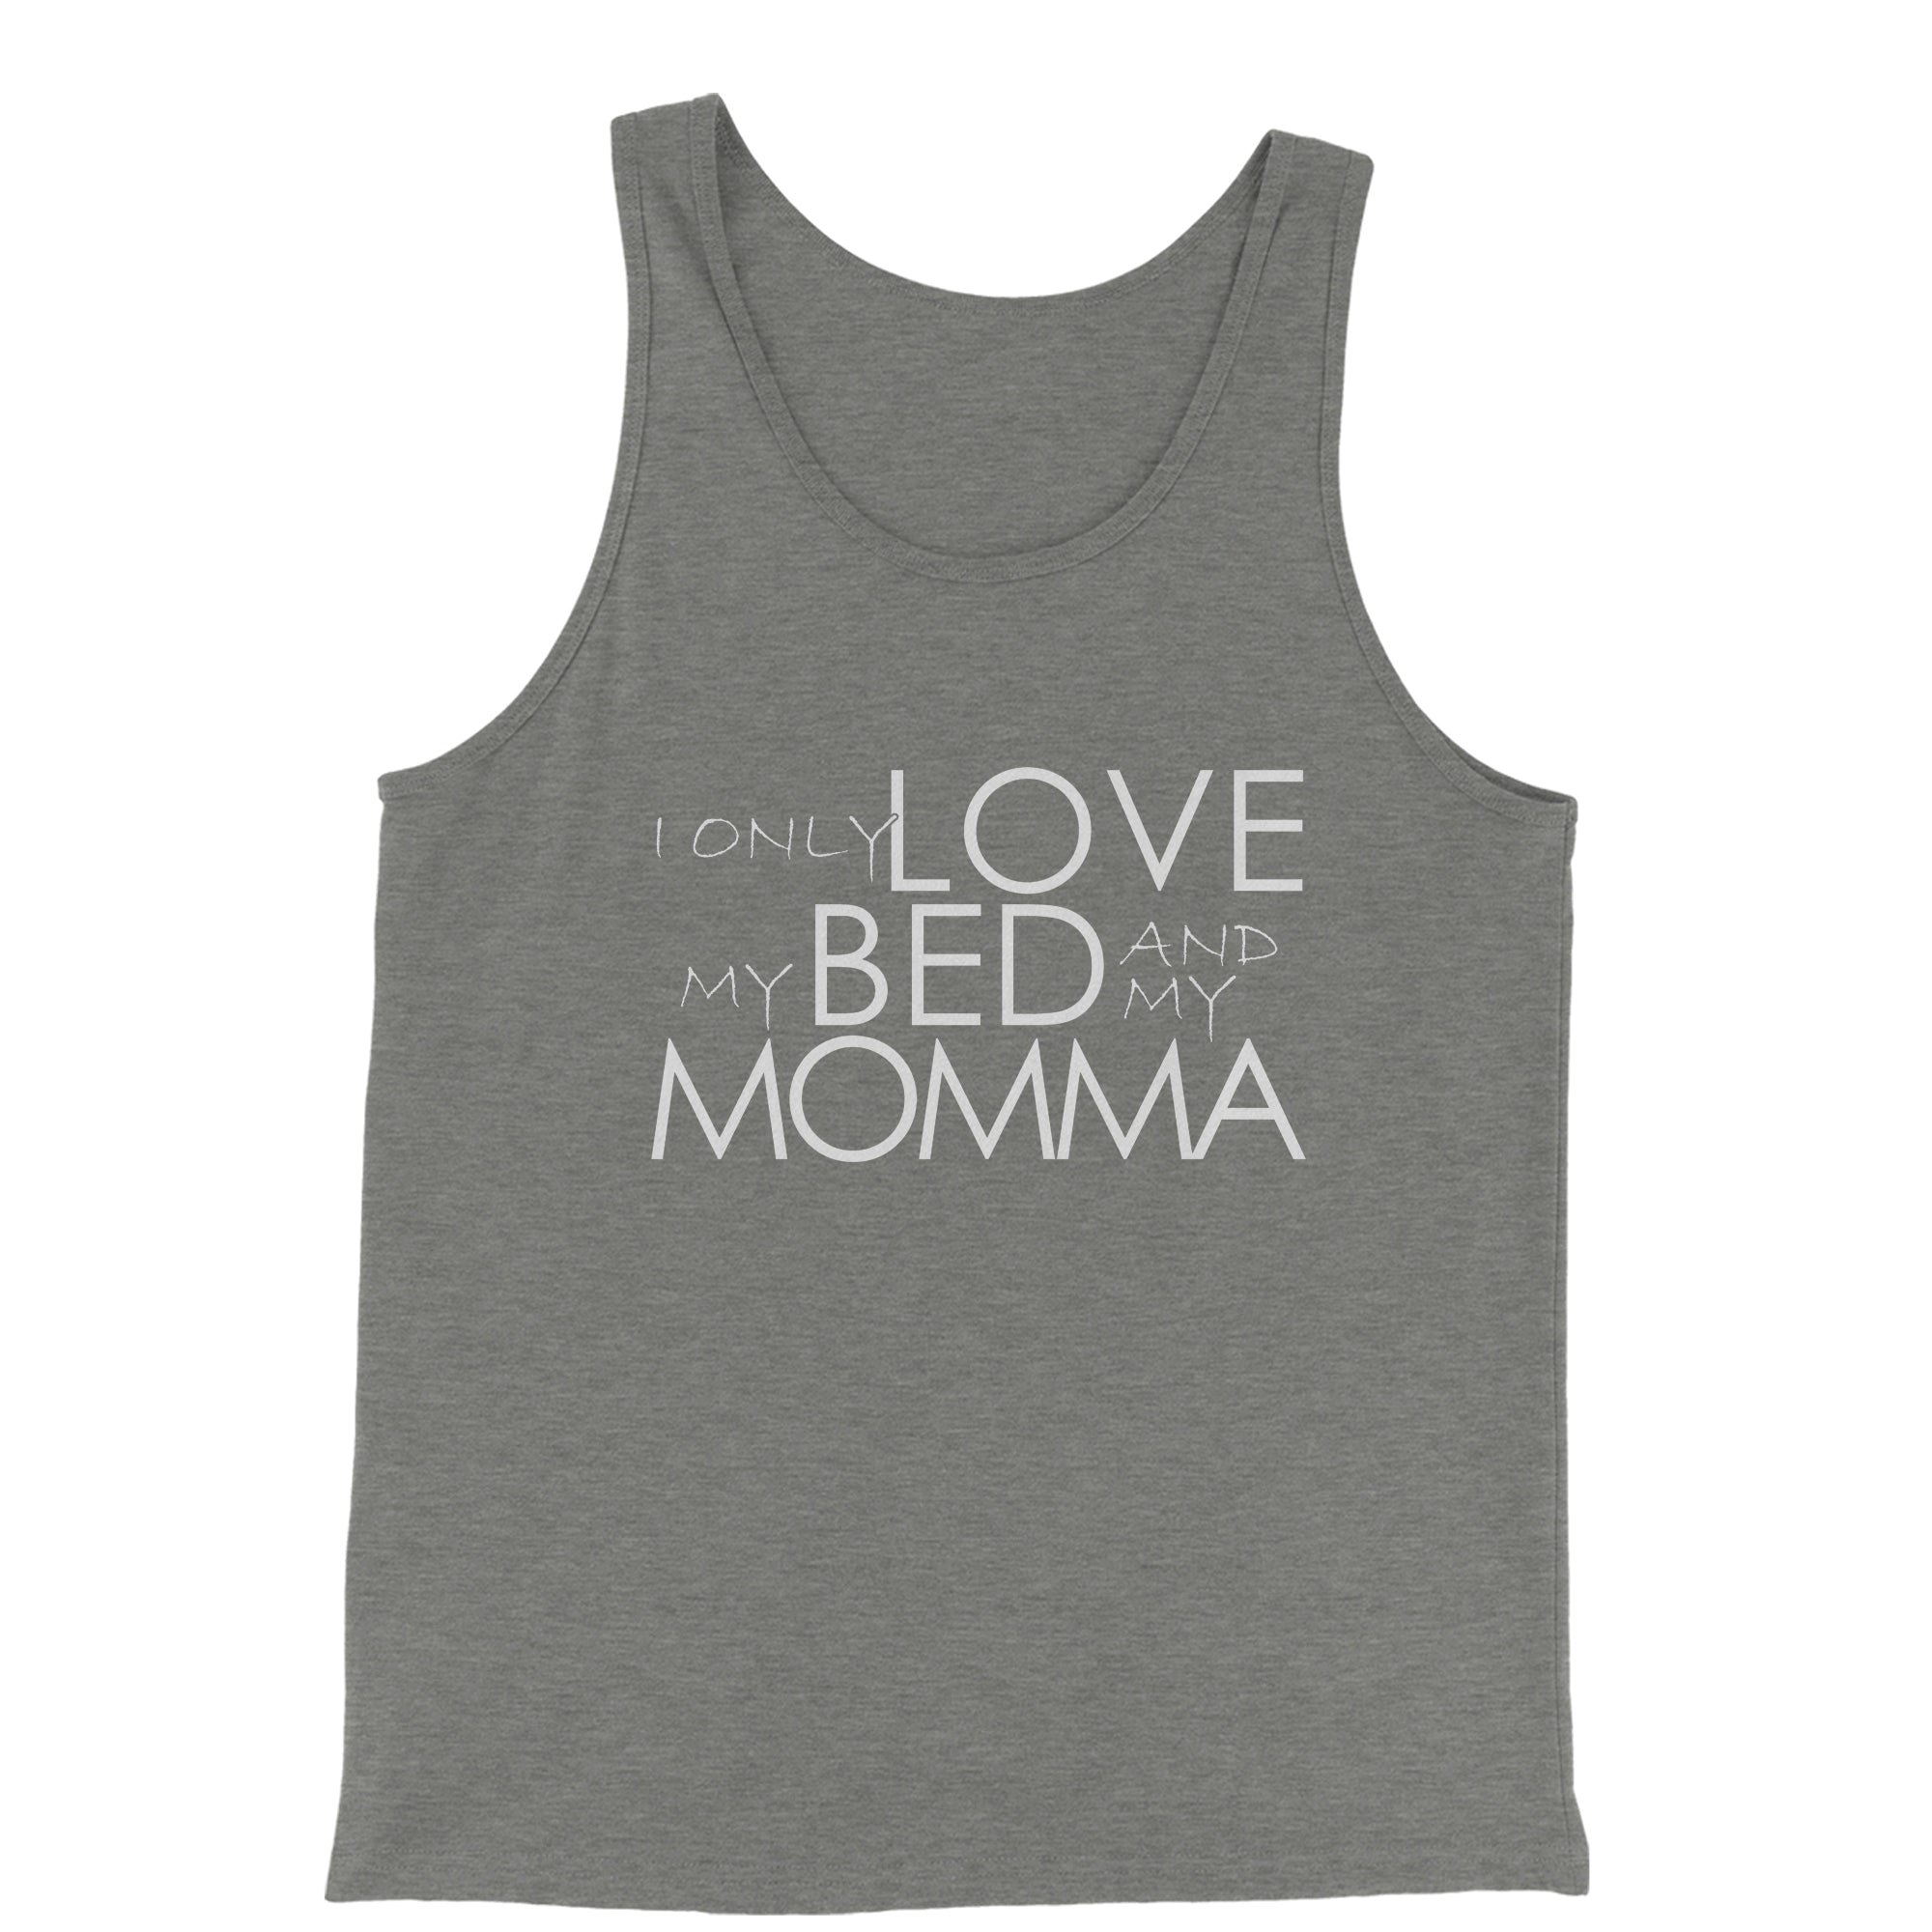 I Only Love My Bed And My Momma Men's Jersey Tank